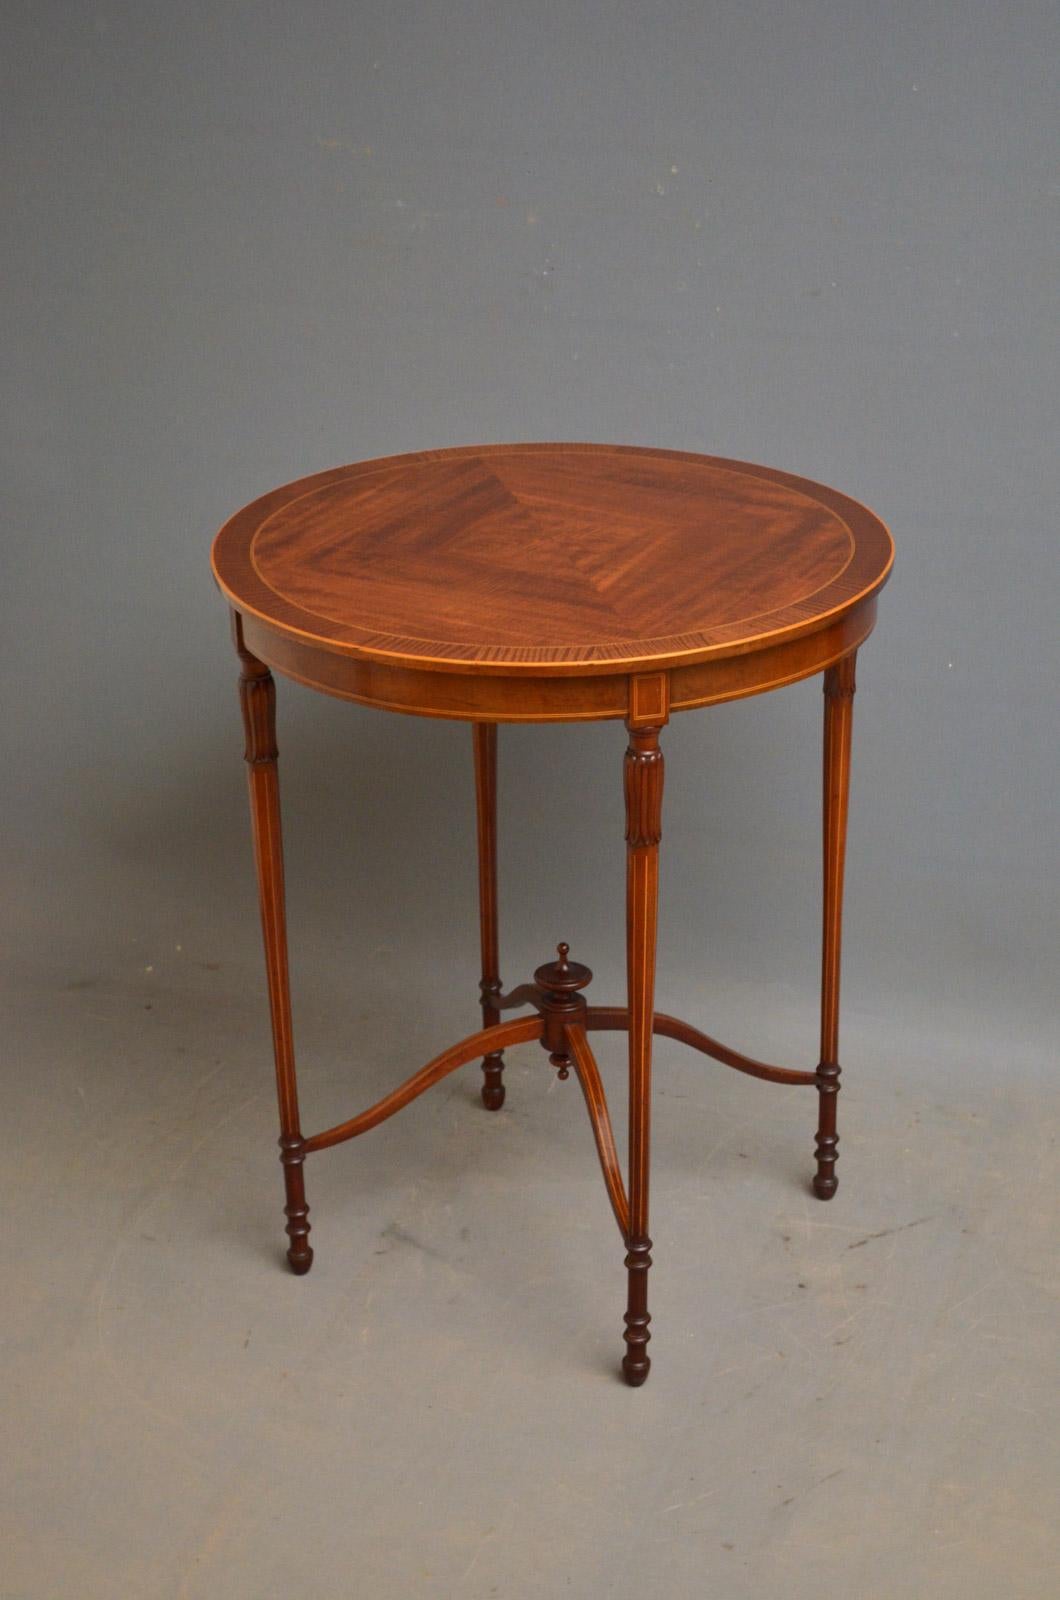 Sn4450 Very elegant Edwardian mahogany and inlaid lamp table, with quarter matched veneered top with cross banded and string inlaid edge, standing on 4 turned, carved and string legs united by shaped stretcher. This antique occasional table is in